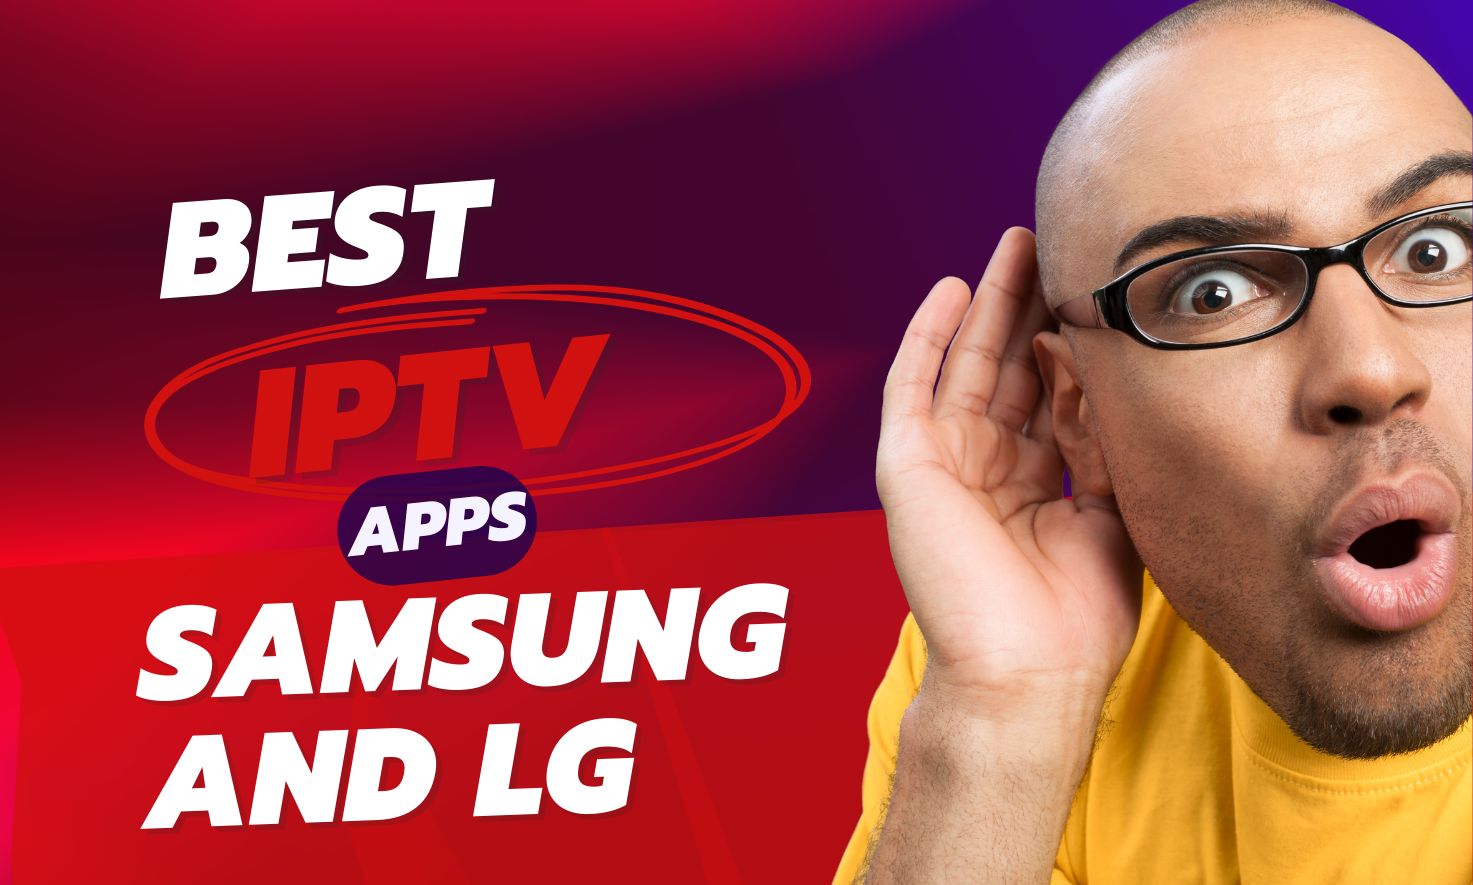 Best iptv apps for Samsung and lg